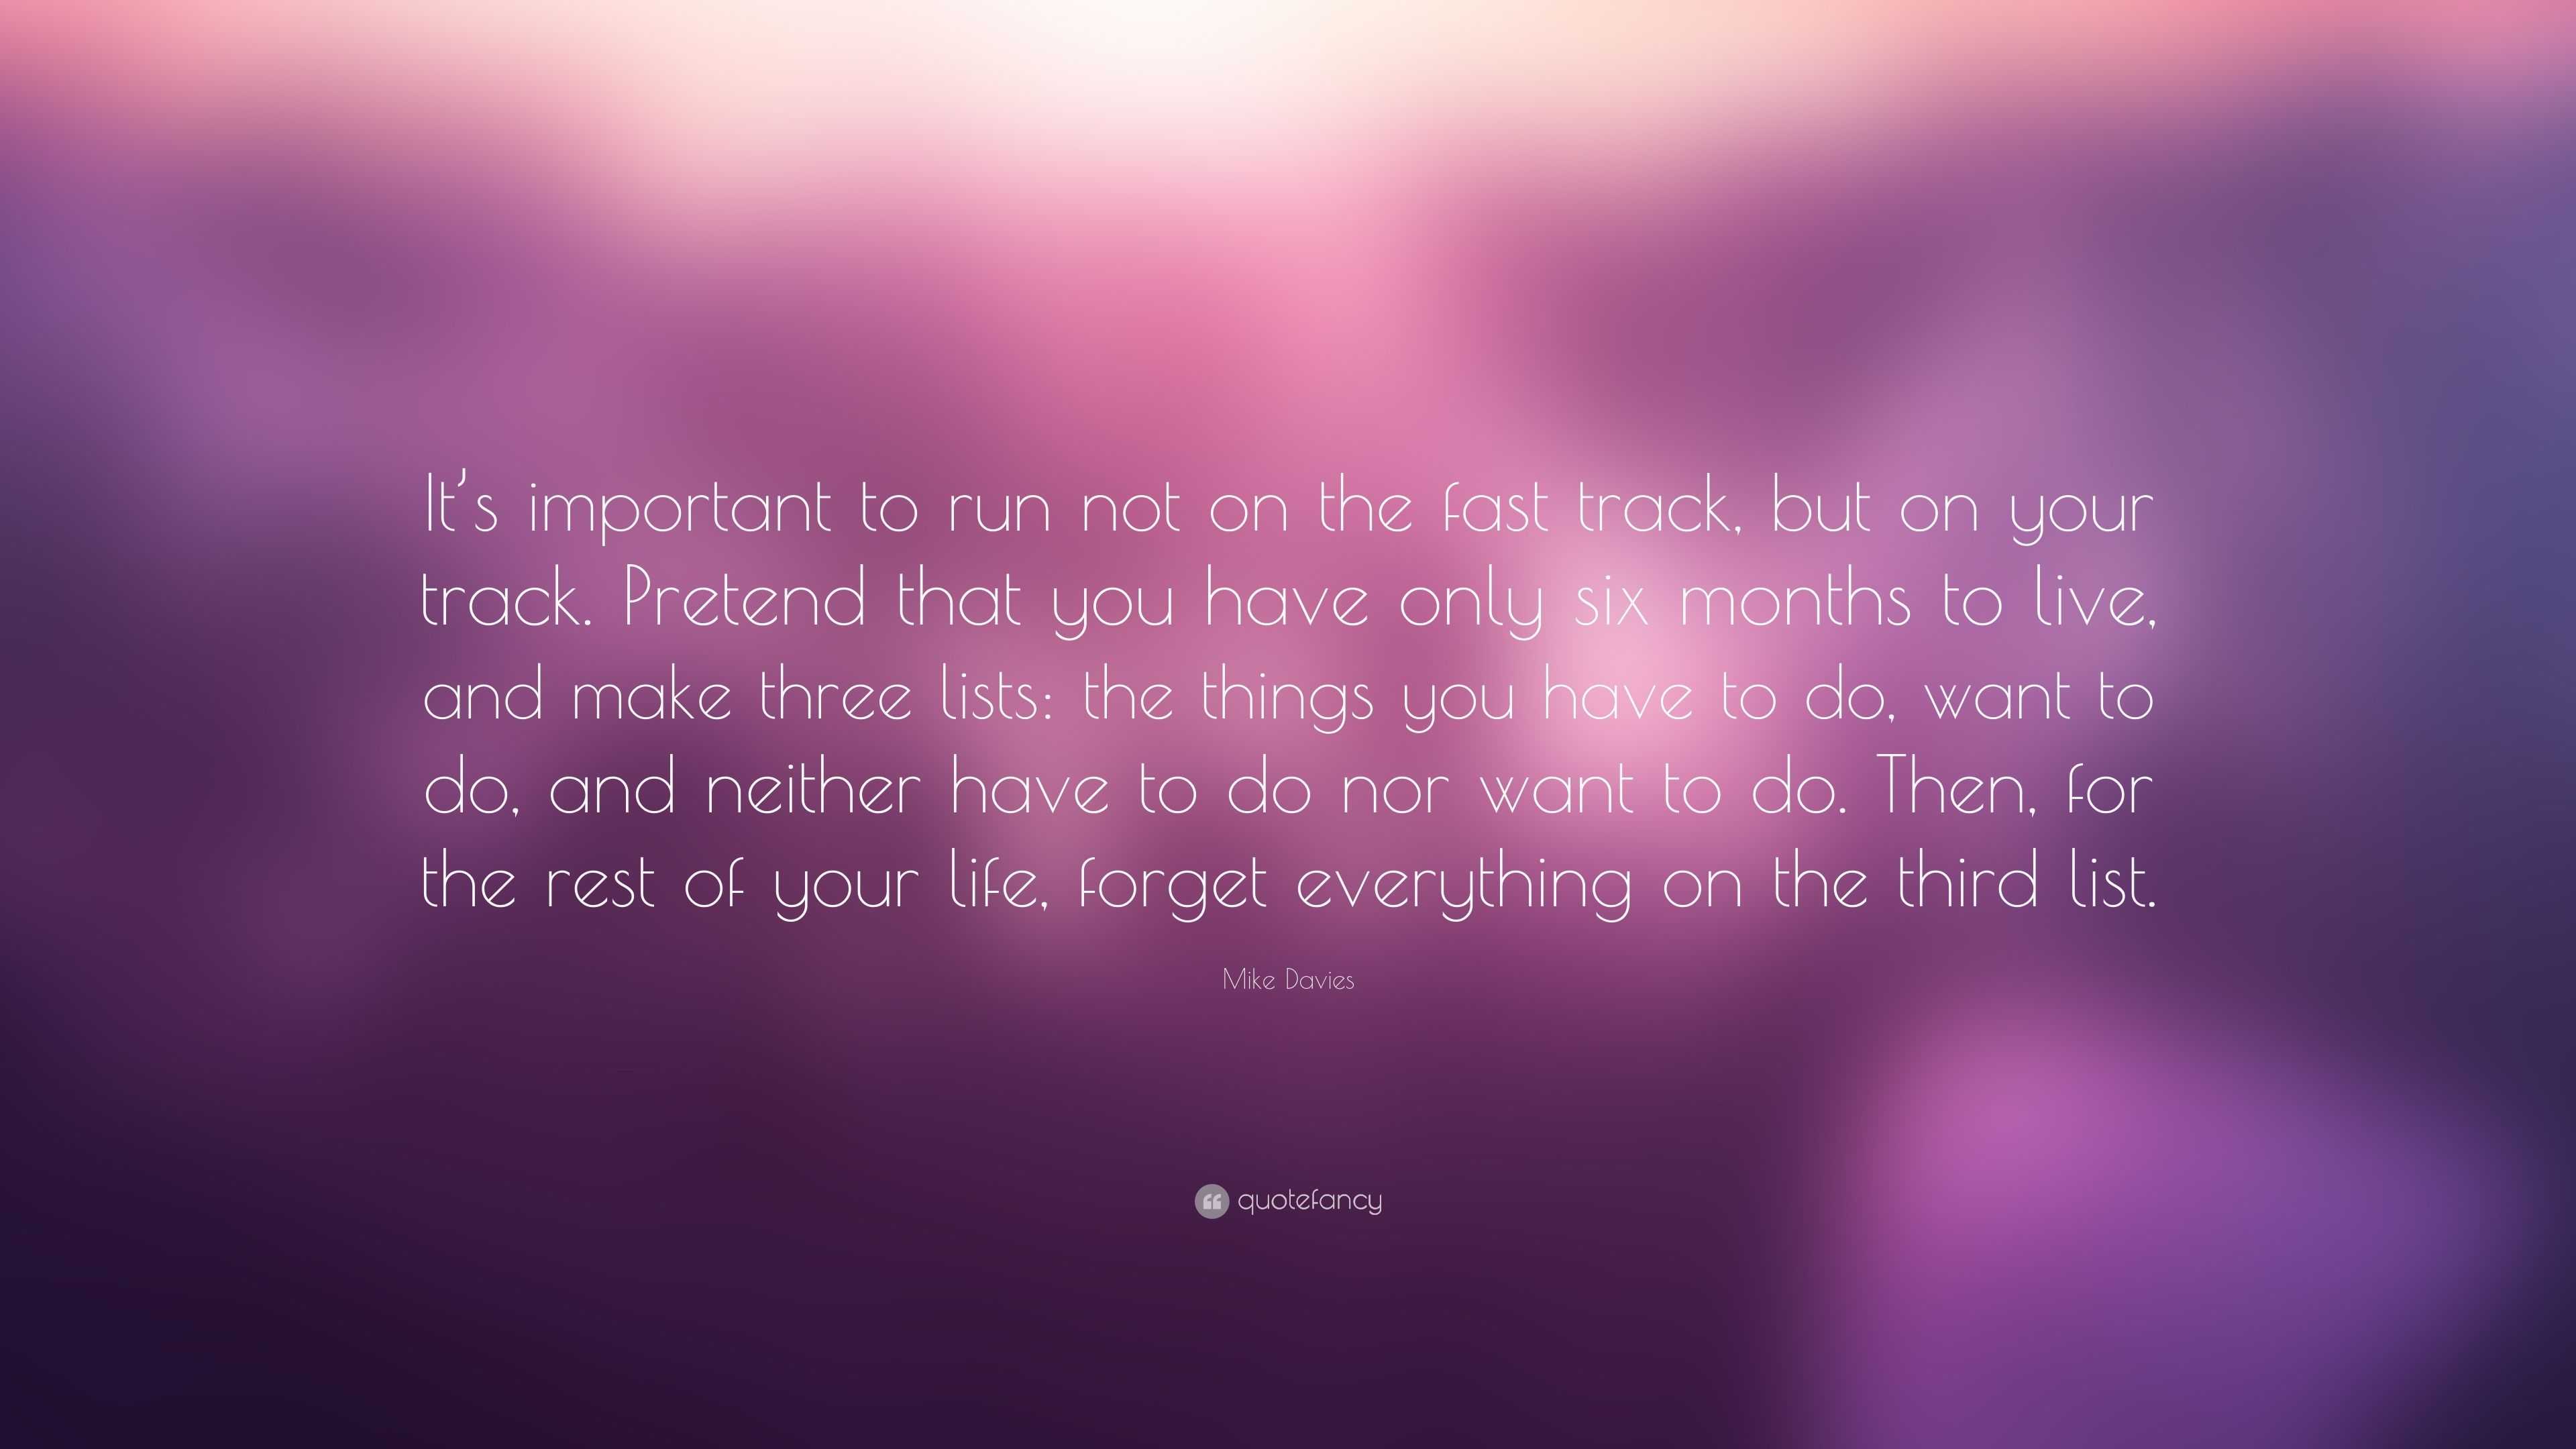 Mike Davies Quote: “It’s important to run not on the fast track, but on ...